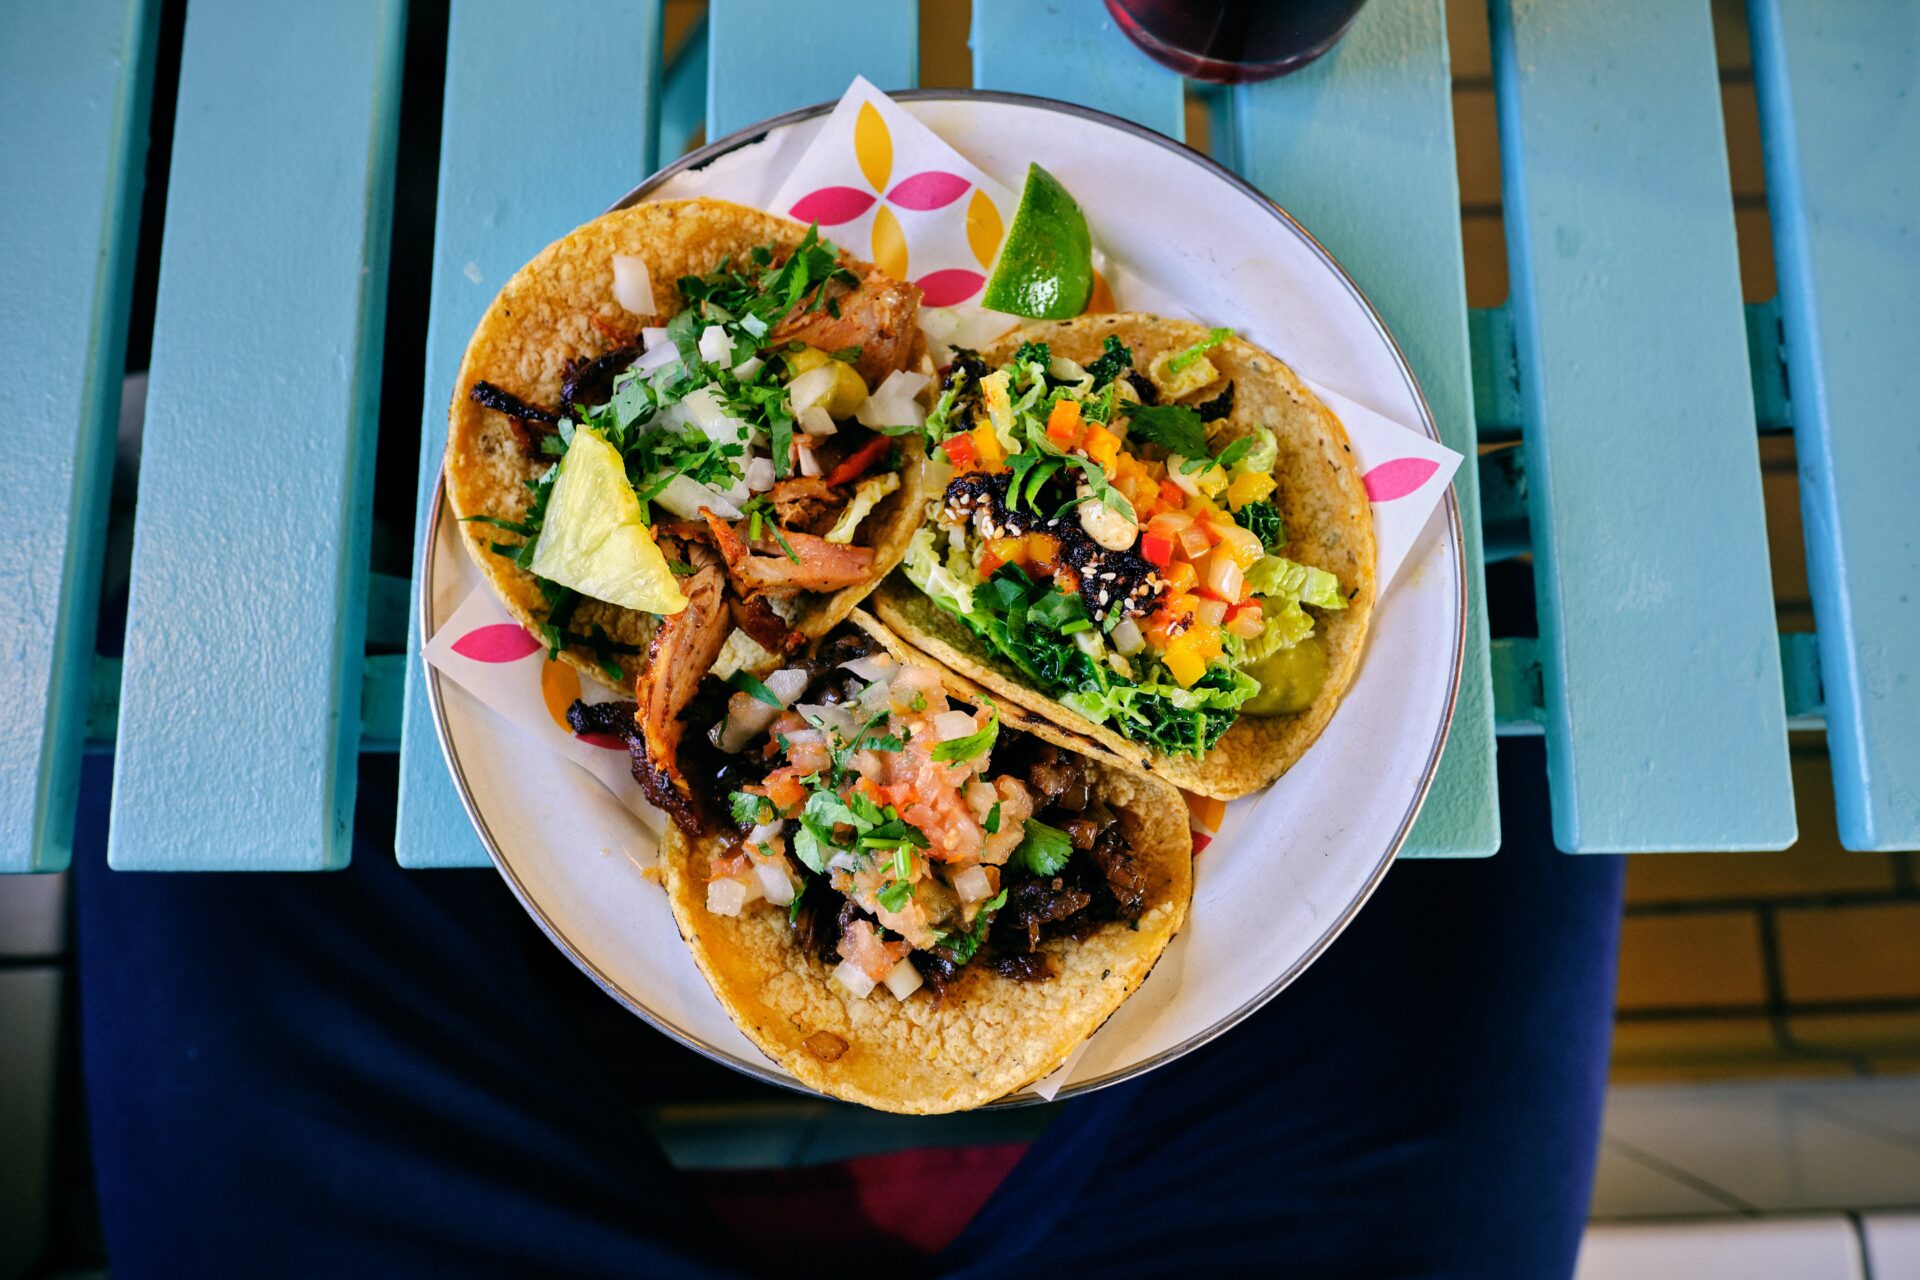 California cuisine - A Guide to the 15 Most Iconic Dishes - from Street Tacos to Michelin Stars